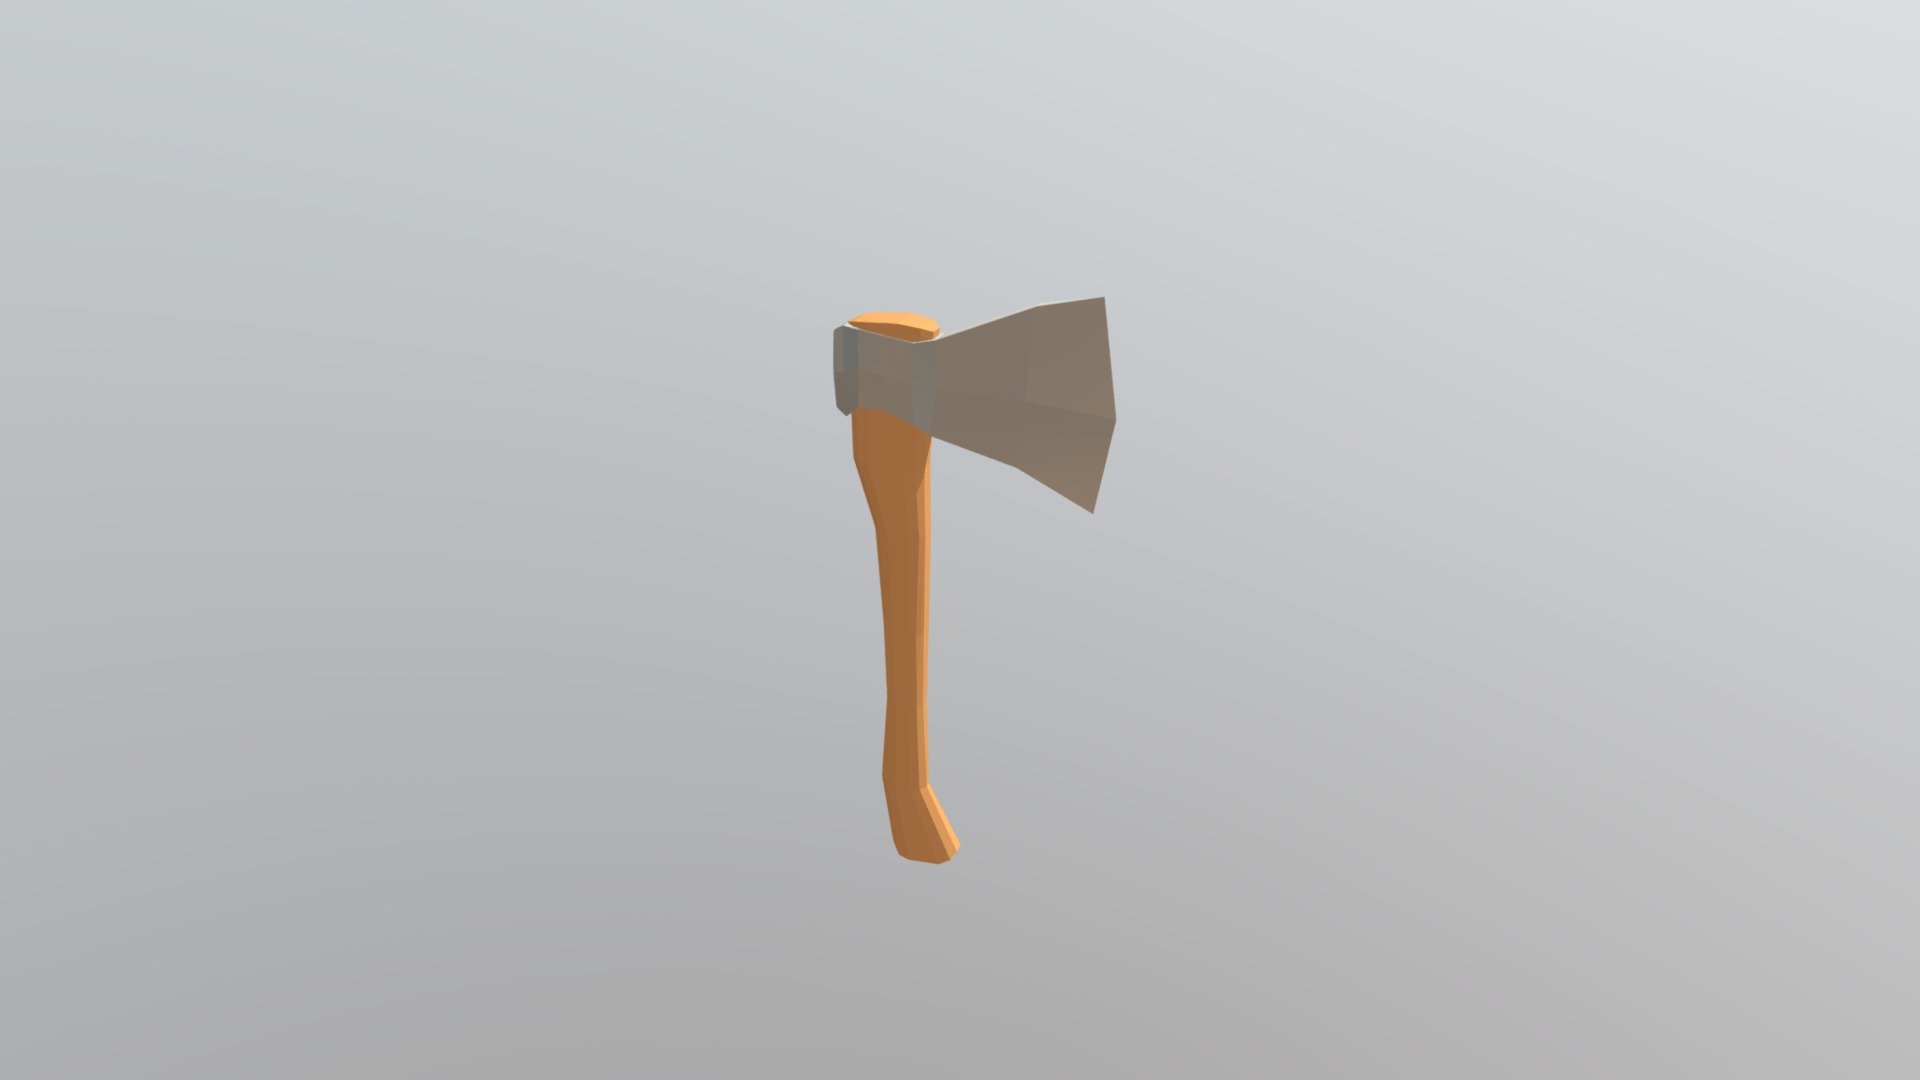 low poly axe cartoon.
ax cartoon for games in style Low poly.
a tool for cutting trees in your projects 3d model